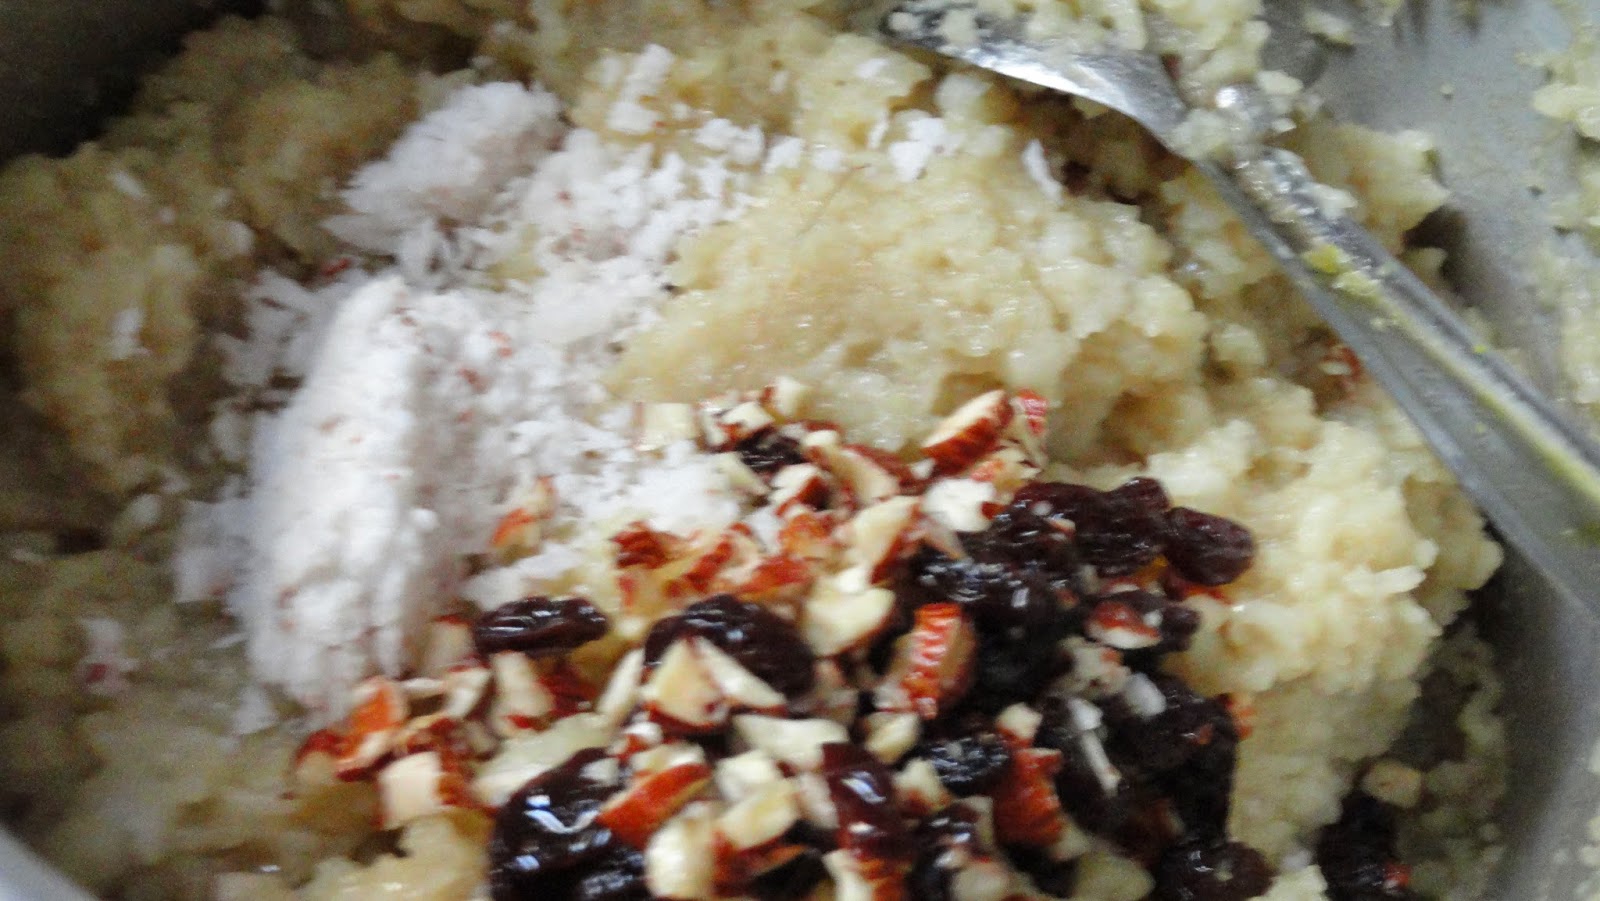 Add grated coconut,Tempered items to the rice and mix well.